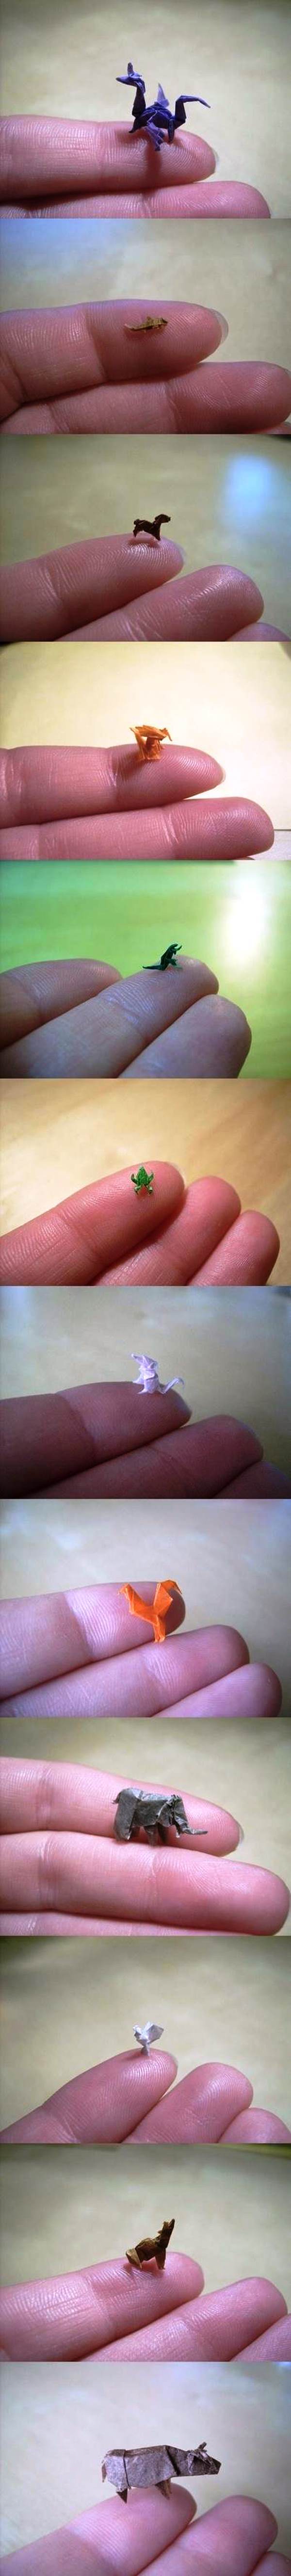 best-viral-pictures-week-5-origami